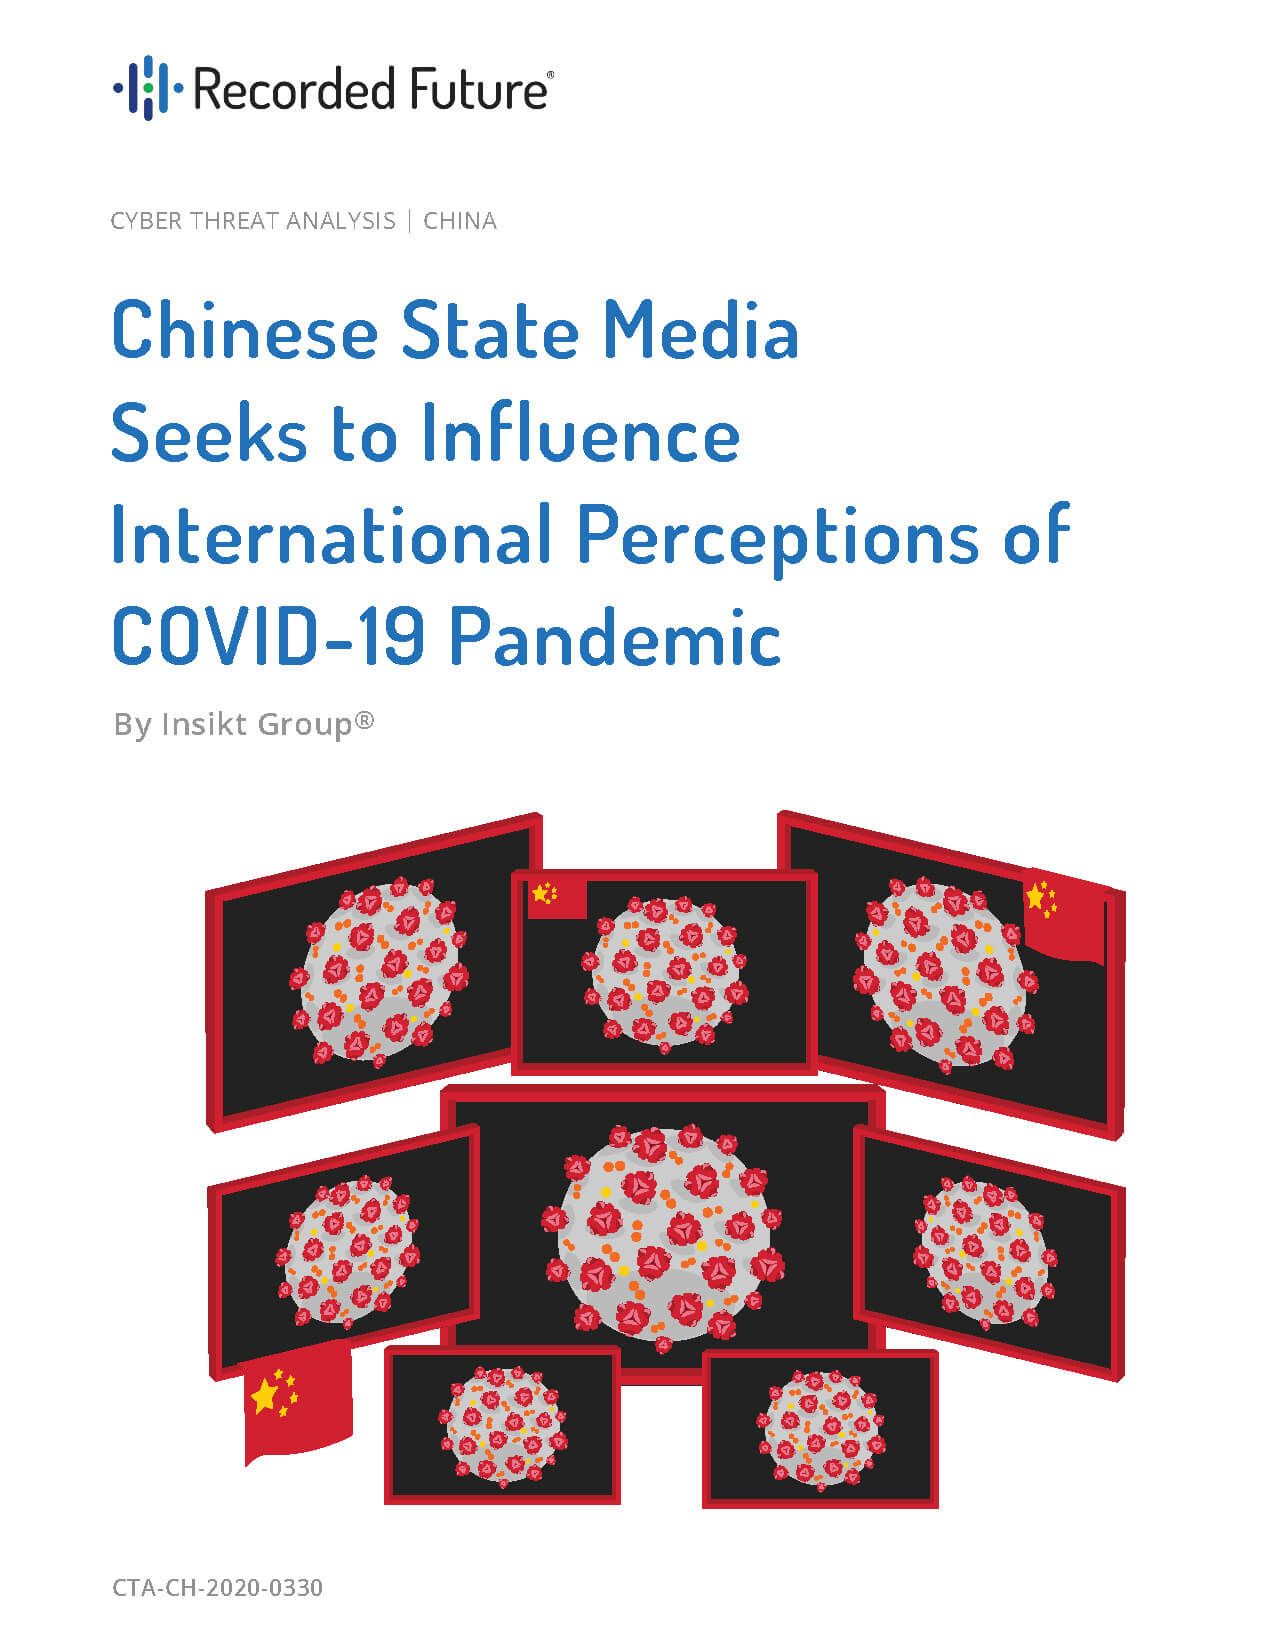 Chinese State Media Seeks to Influence International Perceptions of COVID-19 Pandemic Report